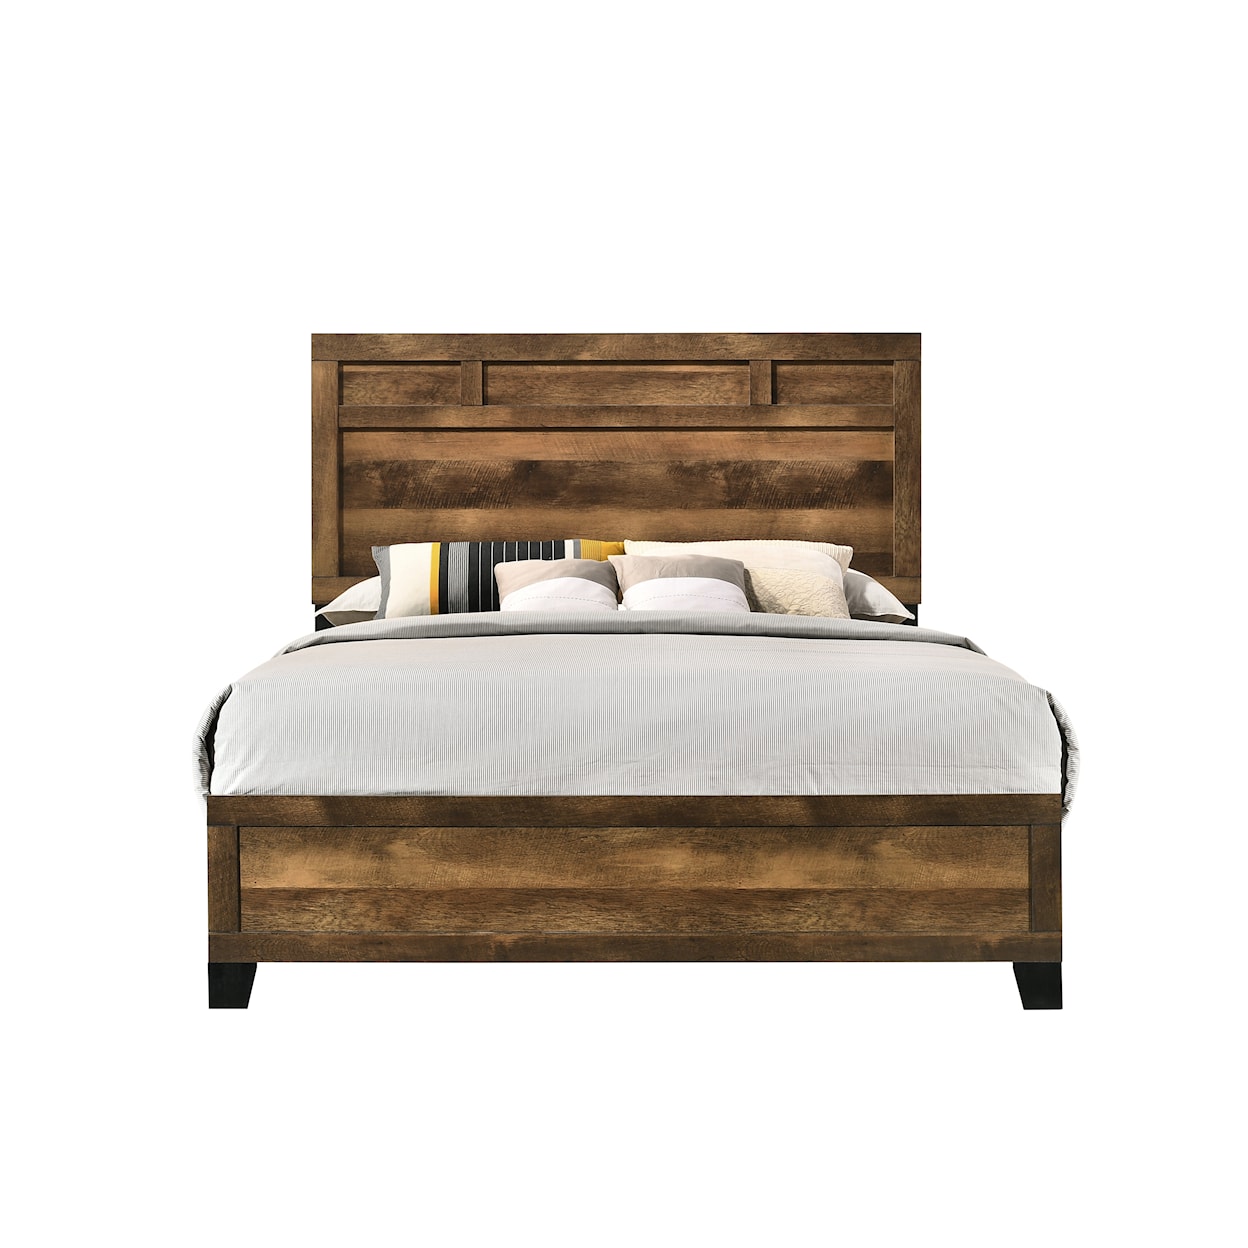 Acme Furniture Morales Queen Bed